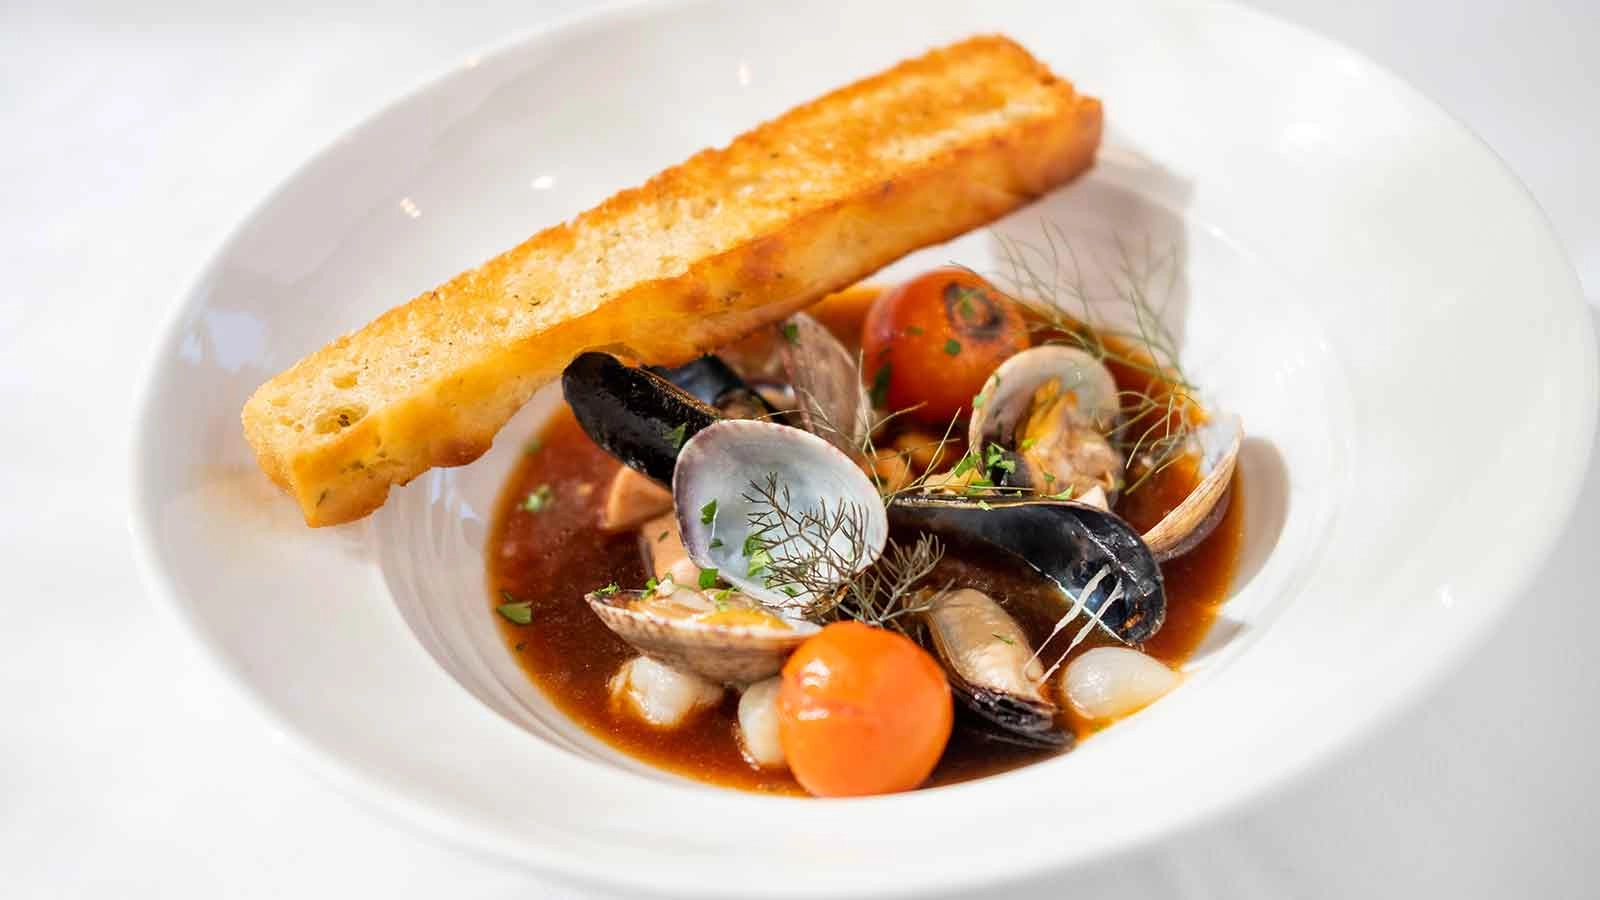 Seafood Cioppino with mussels, clams, shrimp, fennel, onion, focaccia crostini, on the menu at Gatehouse Restaurant at The Culinary Institute of America at Greystone in the Napa Valley.